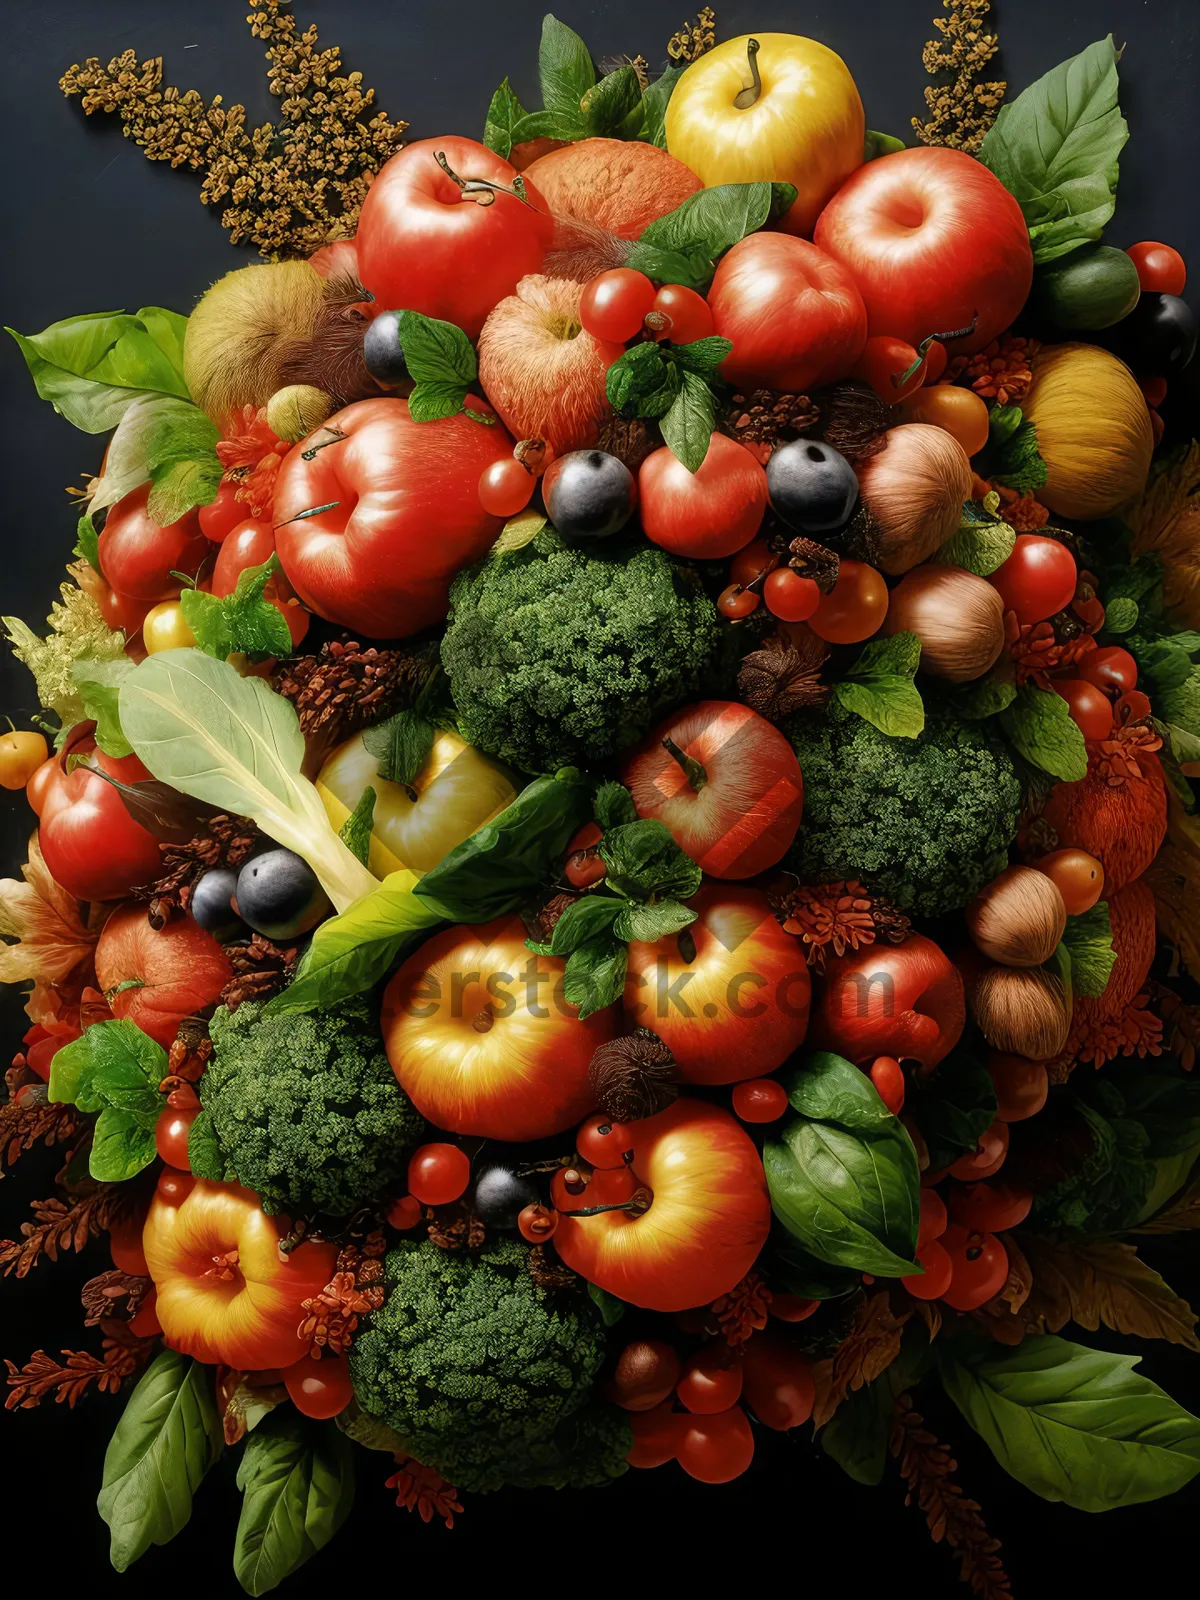 Picture of Vibrant Mix of Fresh, Vitamin-Rich Fruits and Vegetables